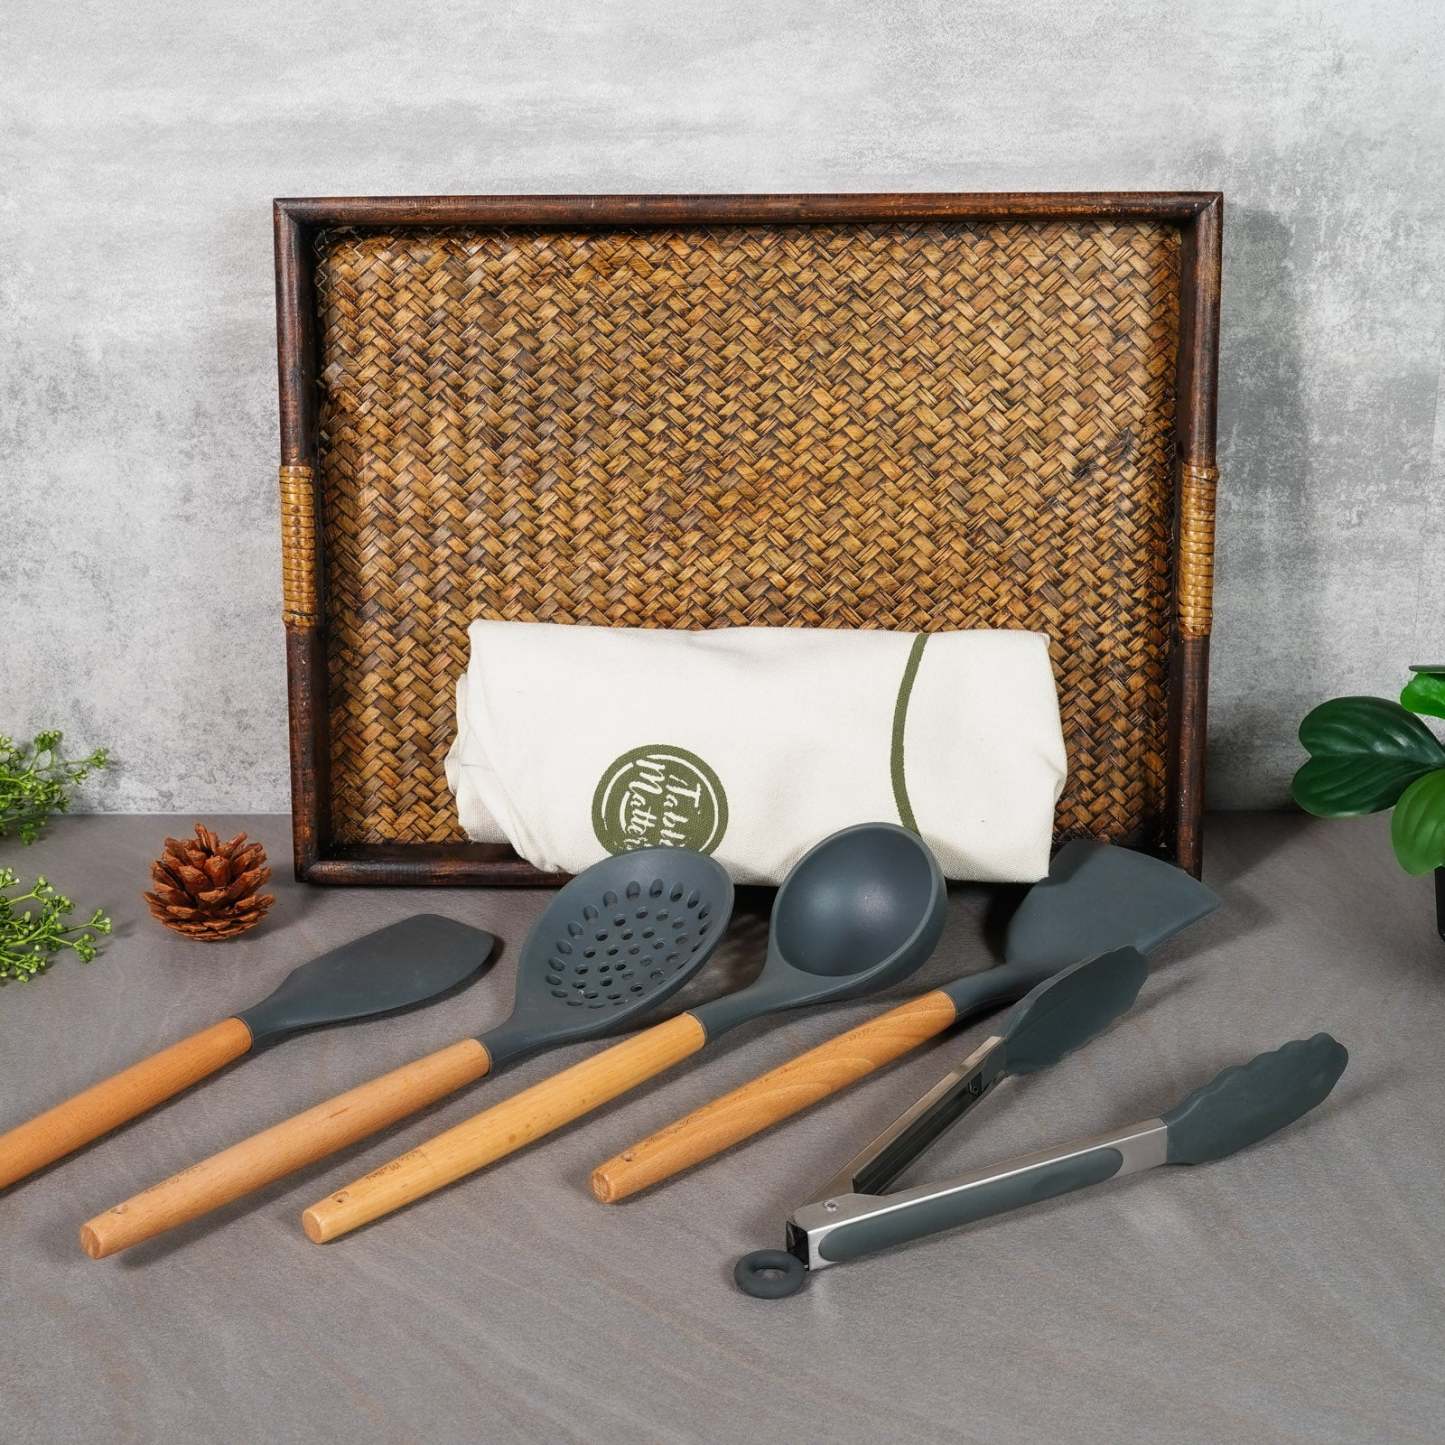 Bundle Deal - Assorted Silic Kitchen Utensils with Rattan Tray - Set of 6